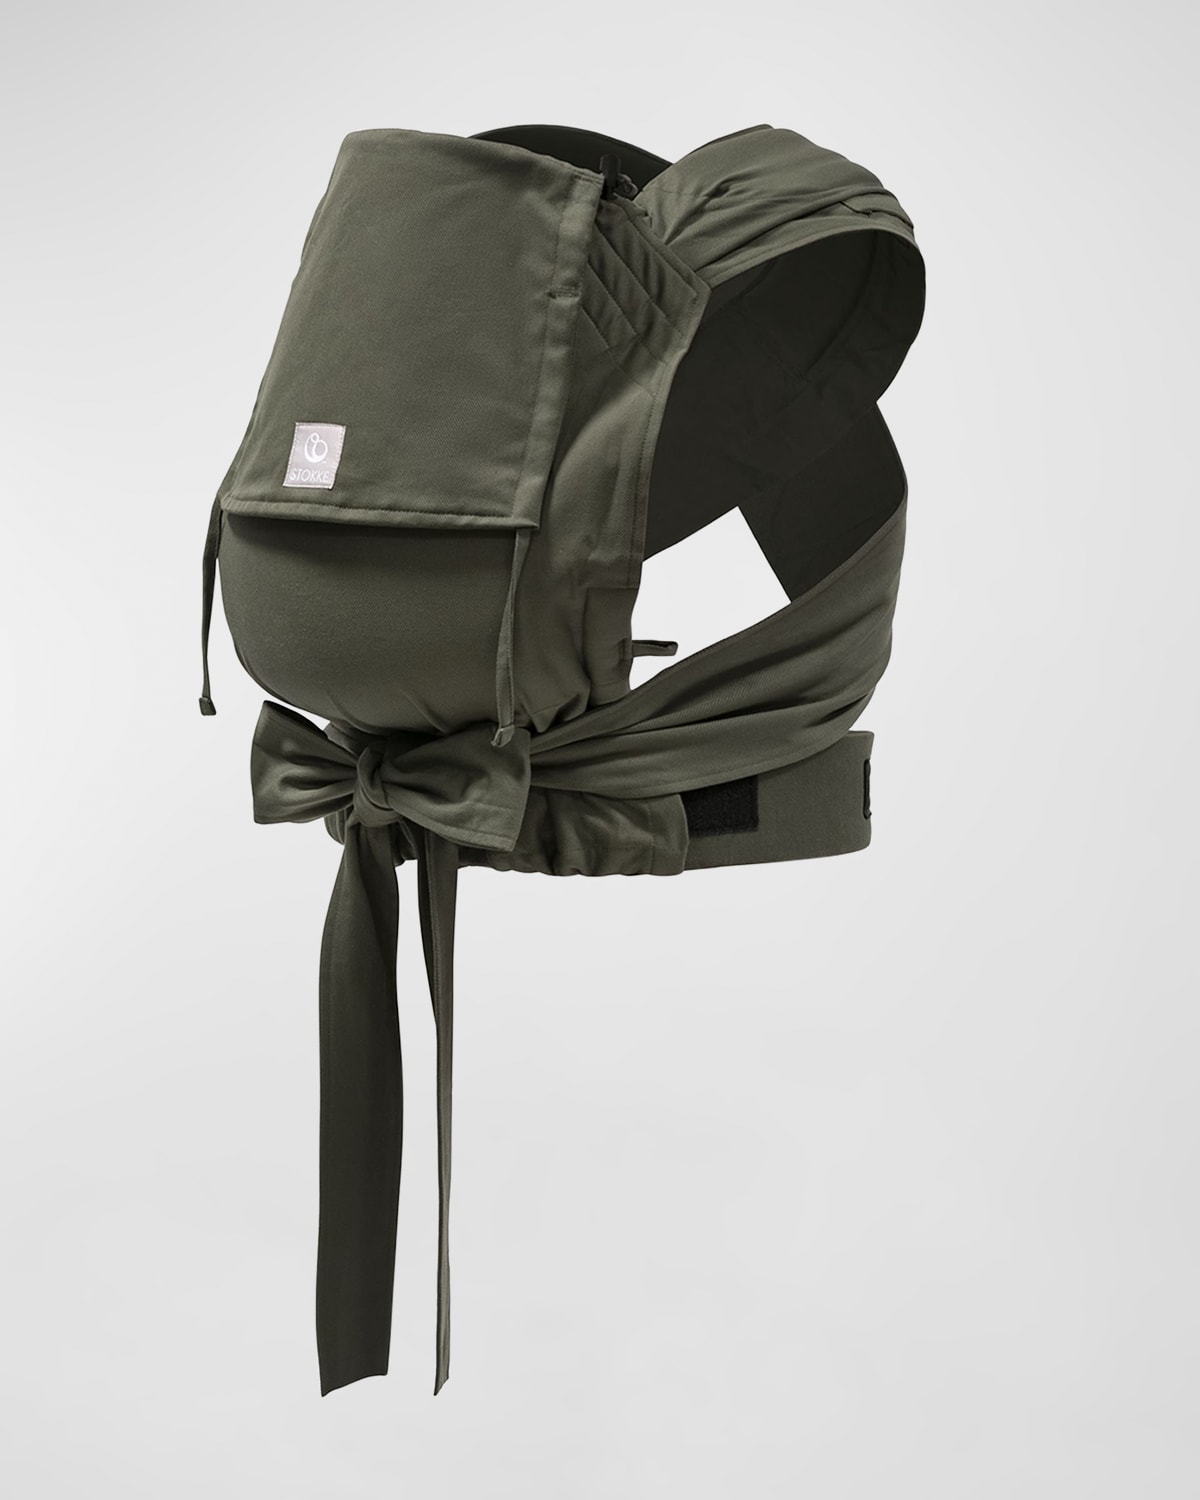 Stokke Limas Baby Carrier In Olive Green